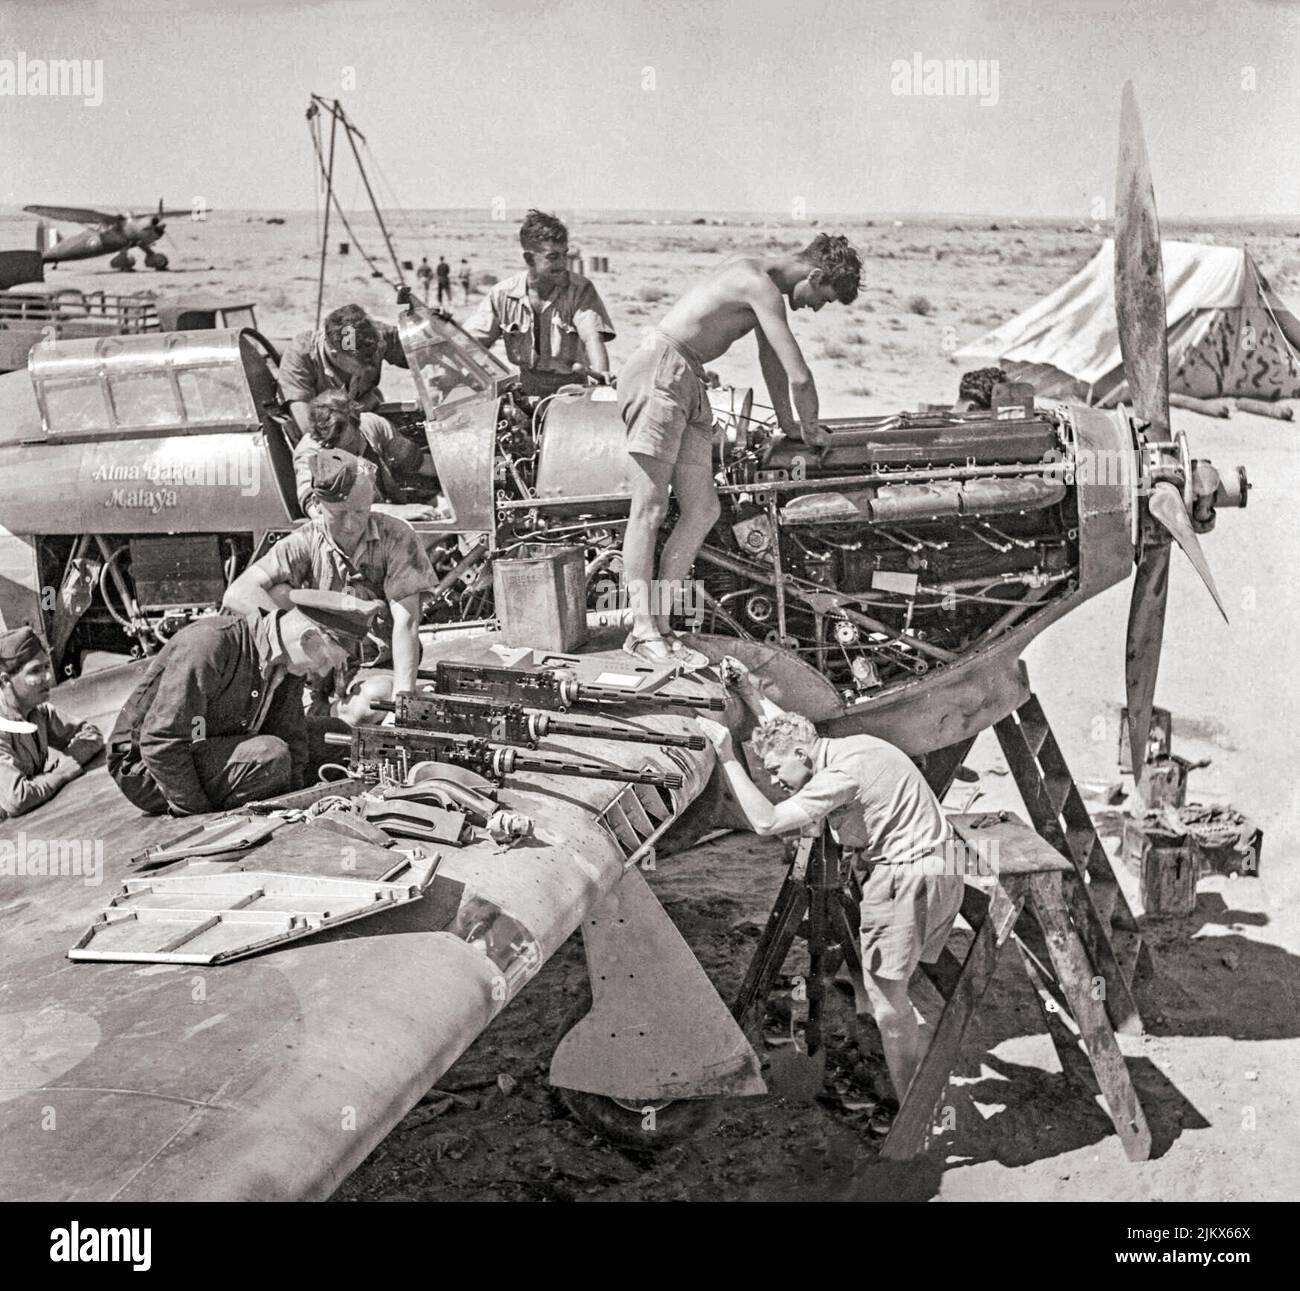 Groundcrew of No. 274 Squadron RAF overhaul a Hawker Hurricane Mark I in Libya, during the defence of Tobruk. The British single-seat fighter aircraft fought in all the major theatres of the Second World War. A Westland Lysander STOL can be seen in the background Stock Photo